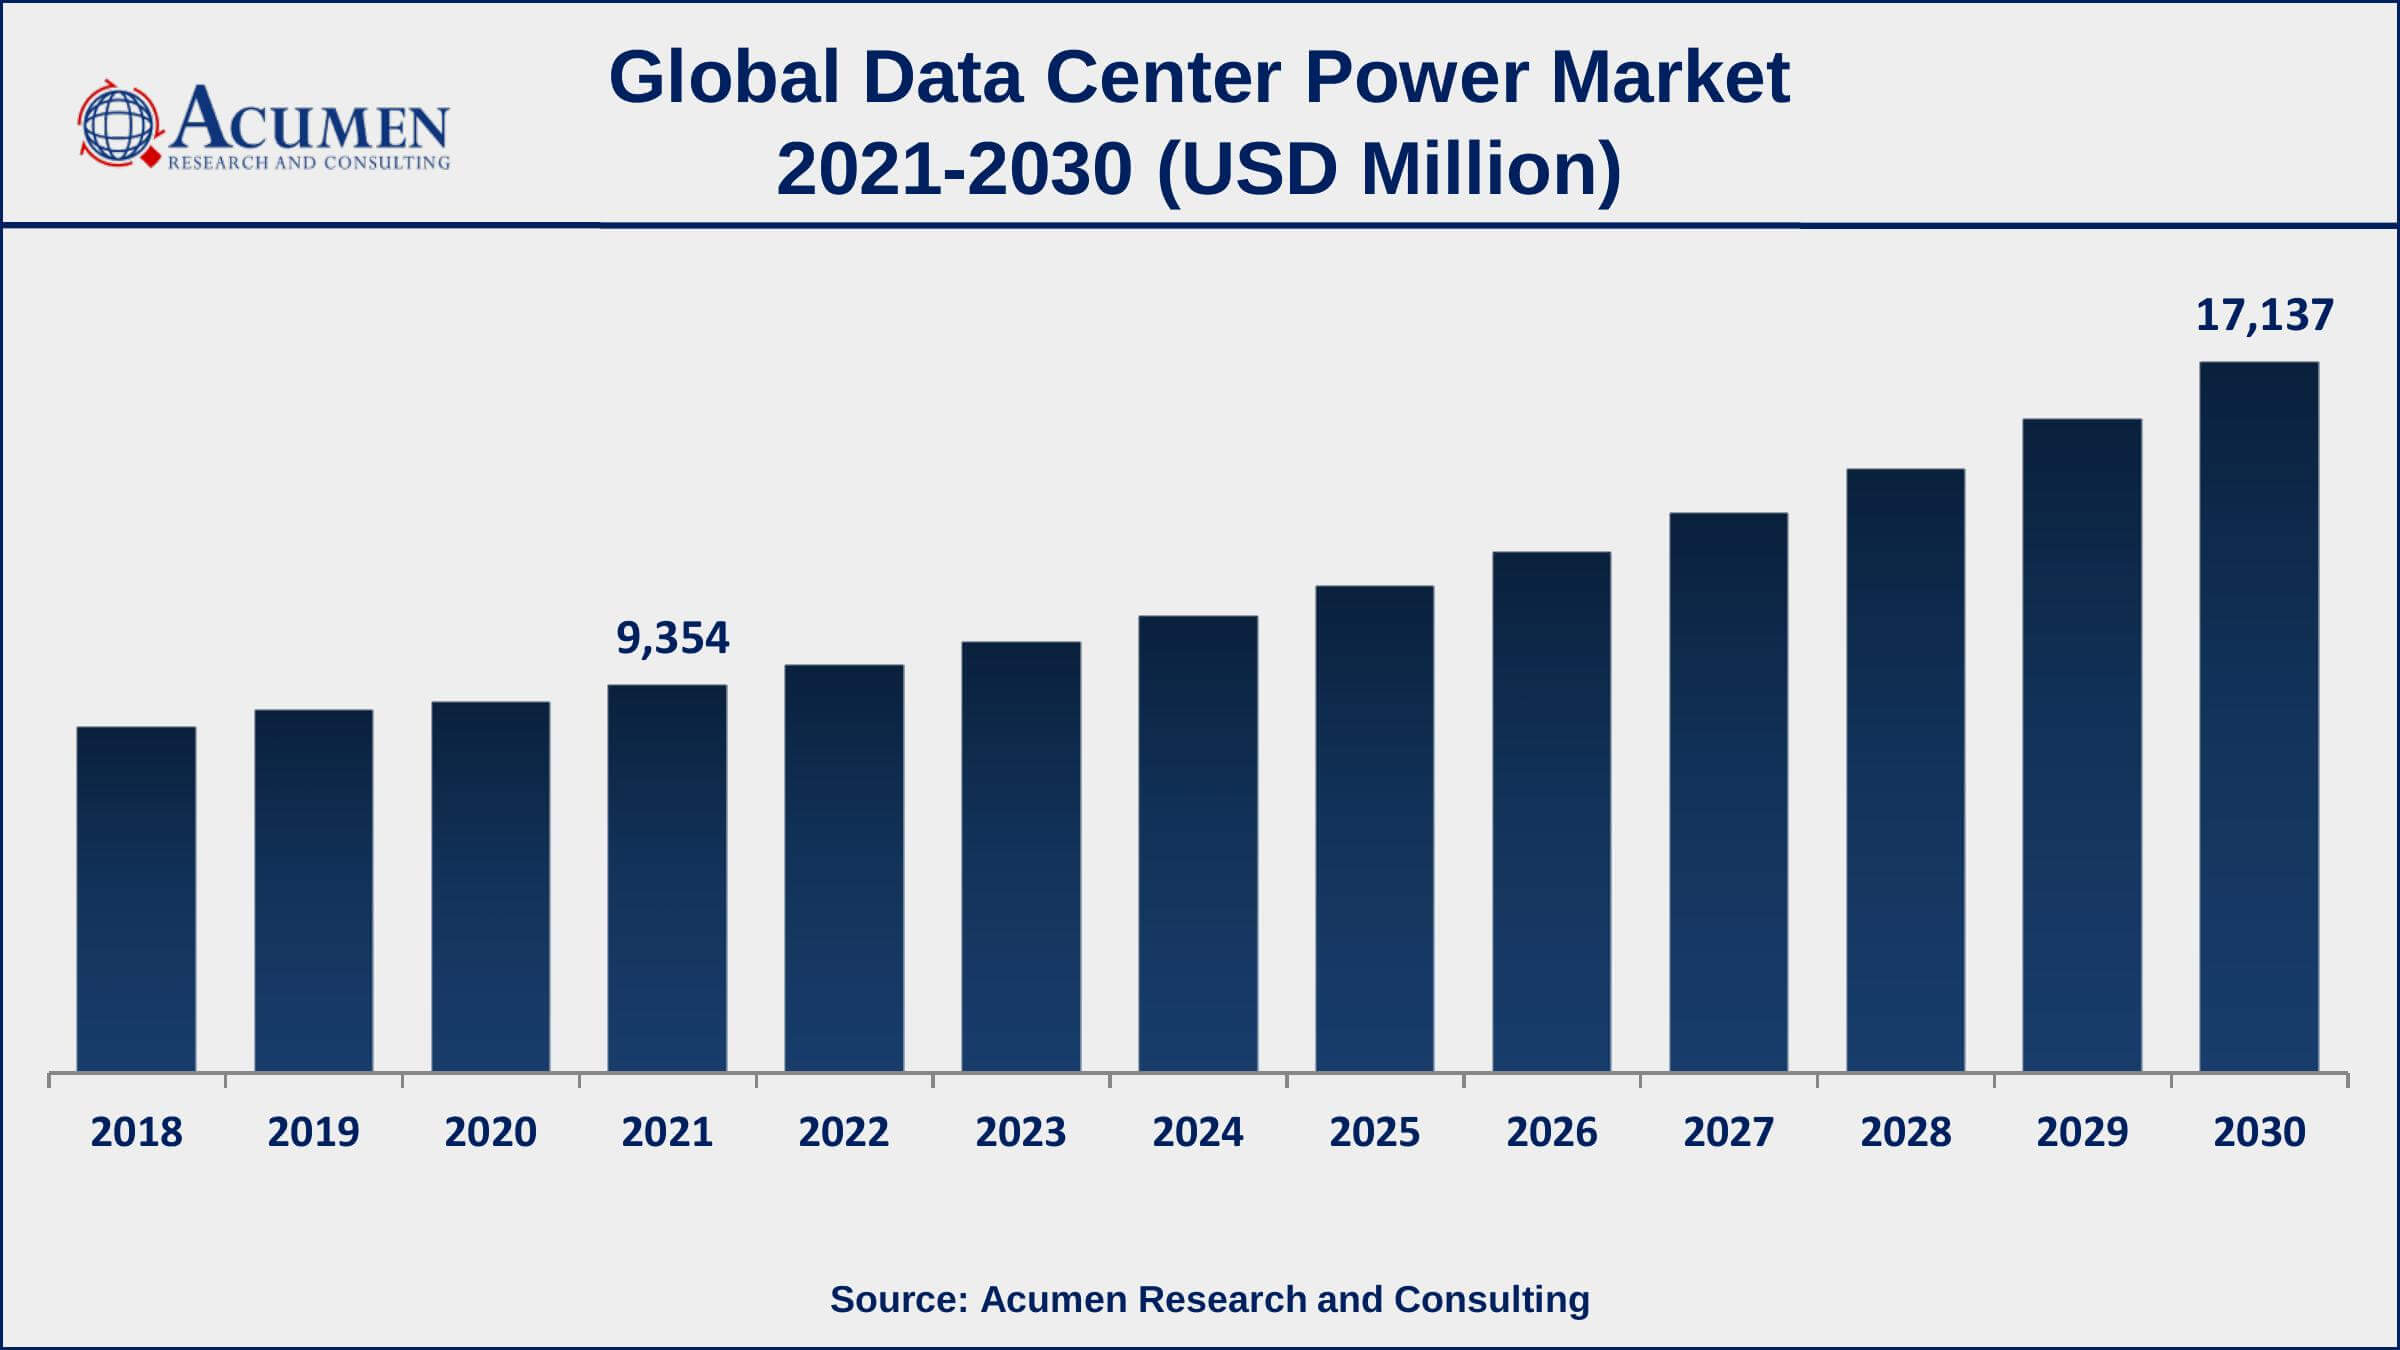 Asia-Pacific data center power market growth will observe strongest CAGR from 2022 to 2030